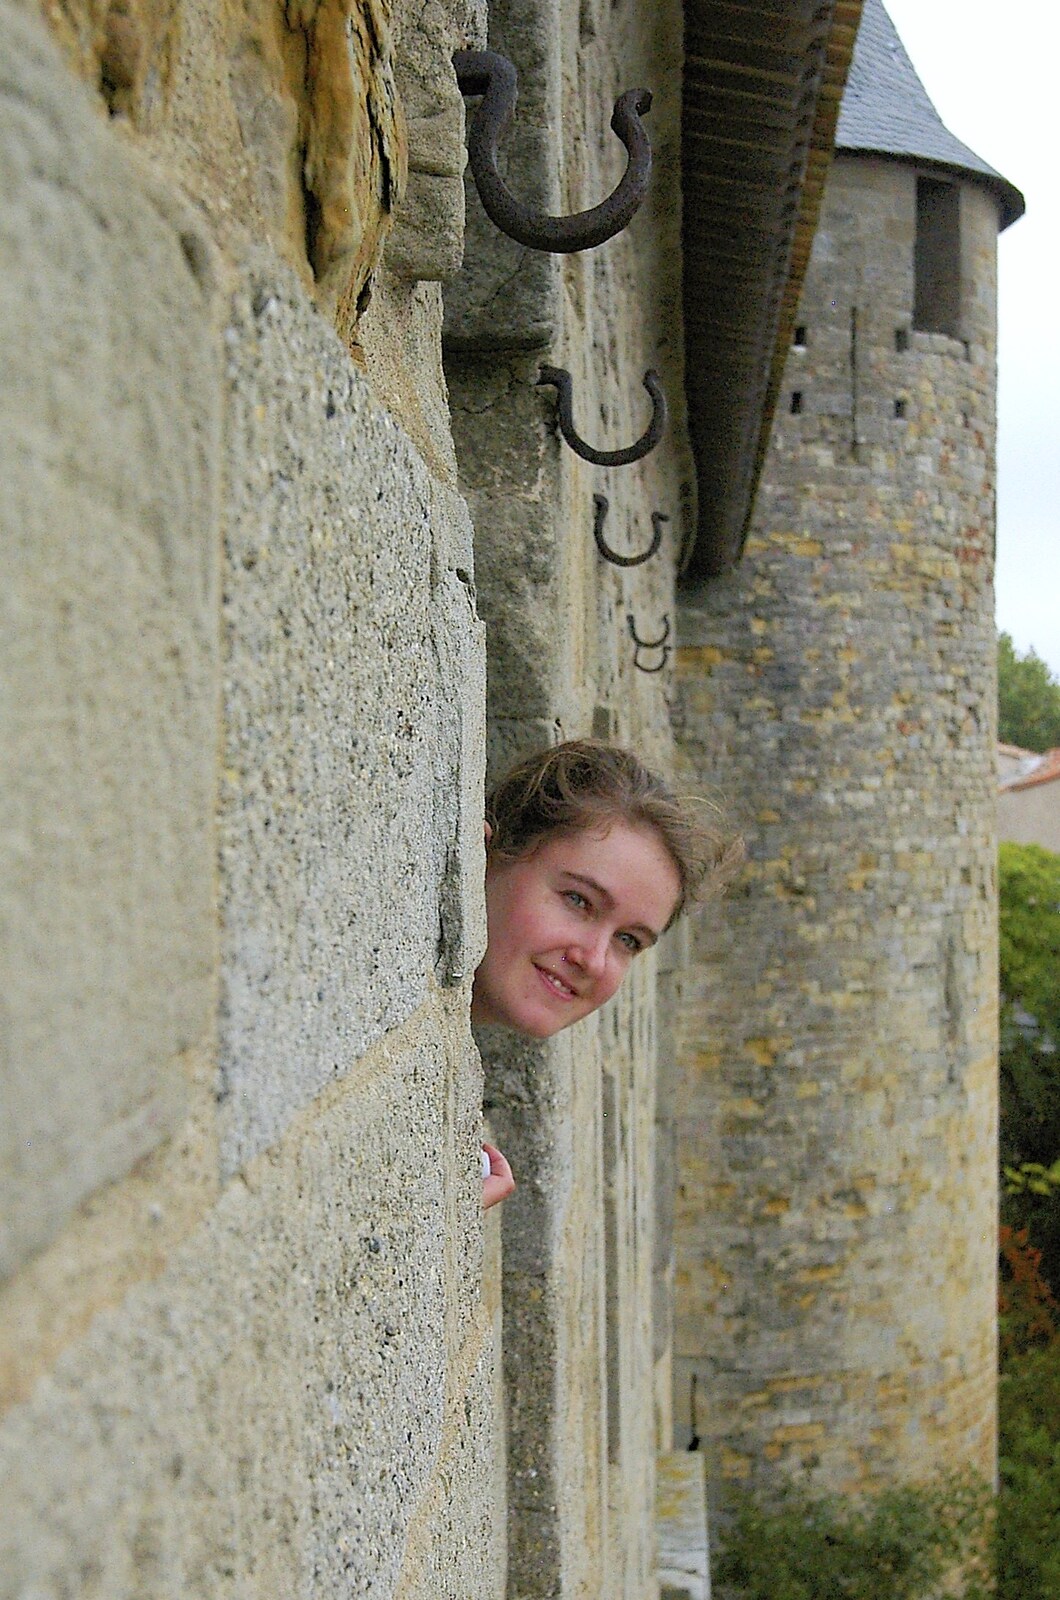 Isobel peeps out of a window at Château Comtal from A Couple of Days in Carcassonne, Aude, France - 21st September 2006